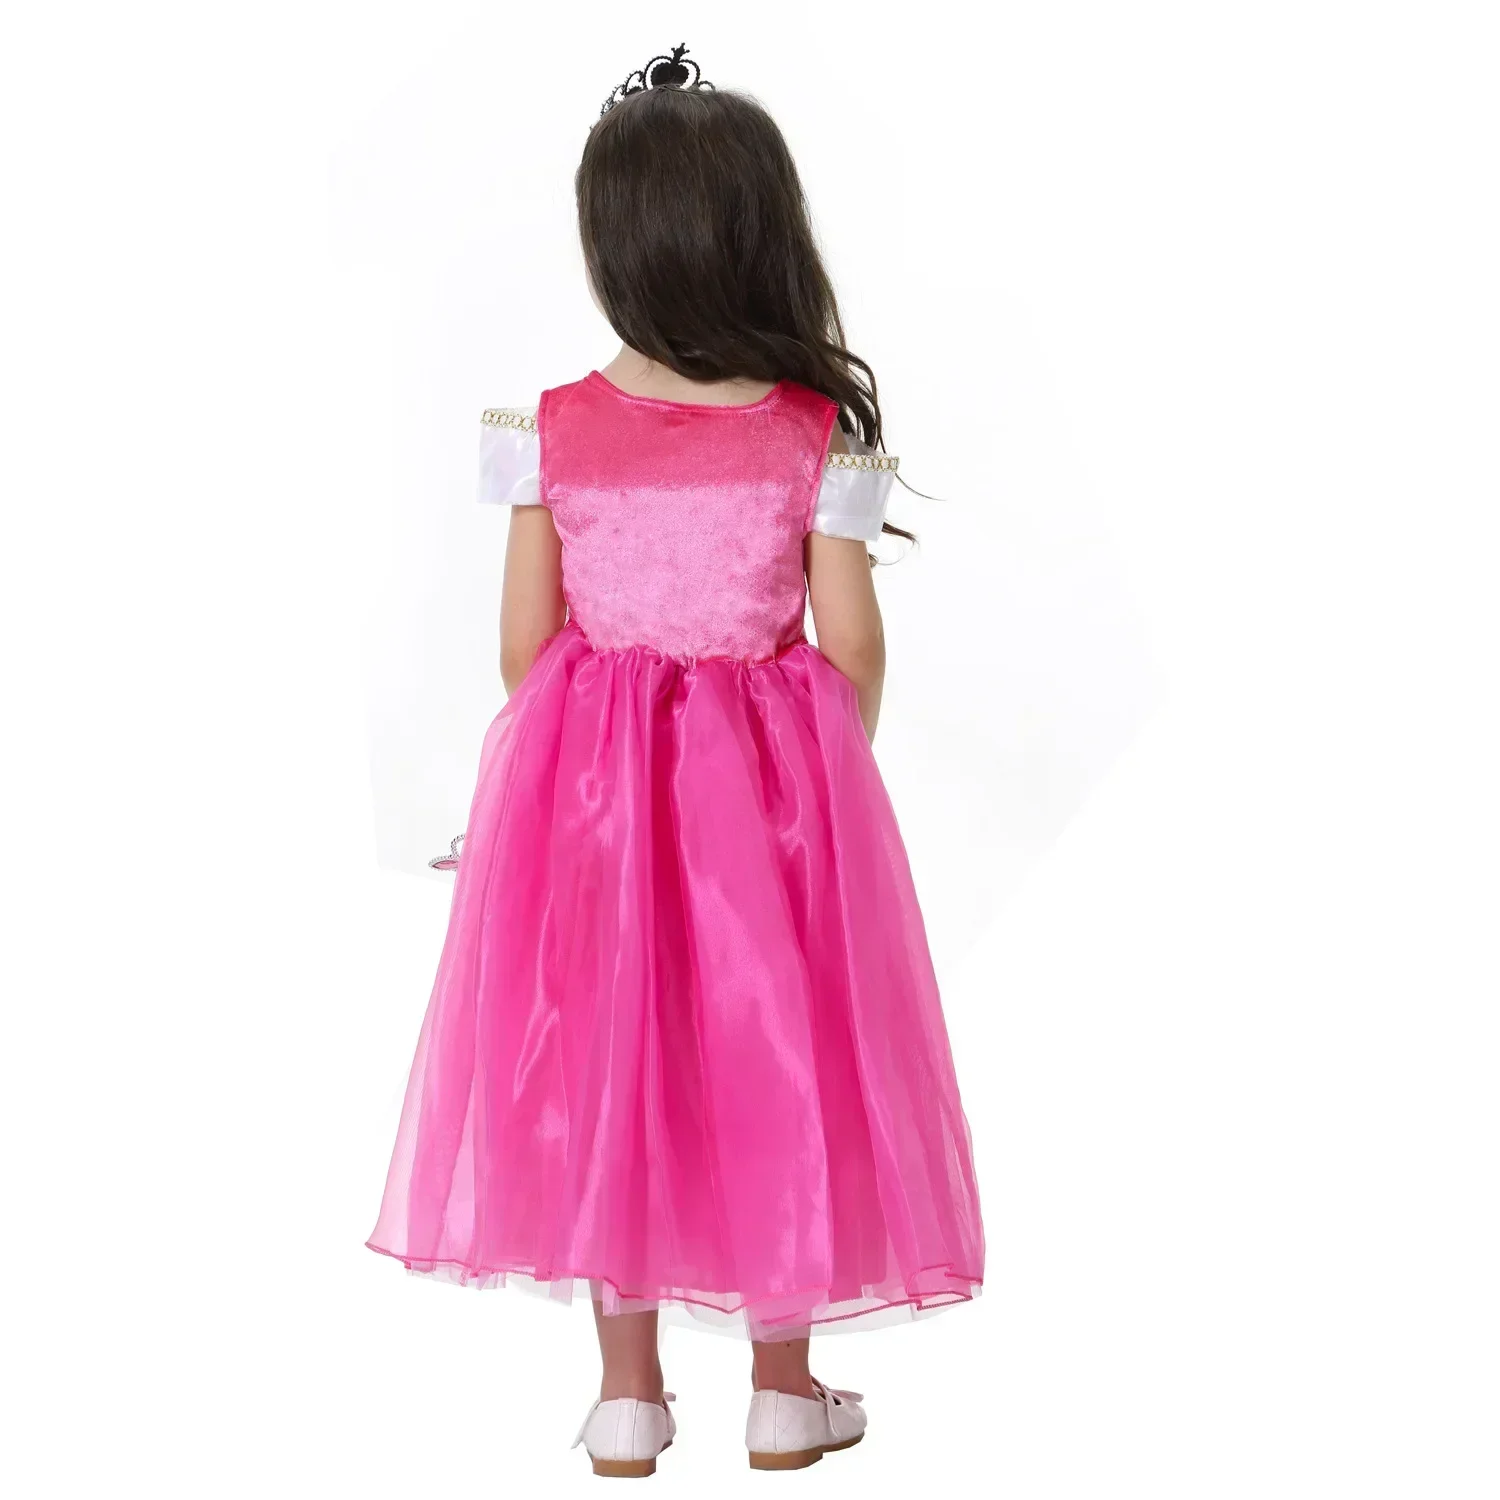 Girls Aurora Dress Princess Halloween Cosplay Costume Princess Rosy Pink Deluxe Outfit Kids Birthday Party Gown Fairy Disguise